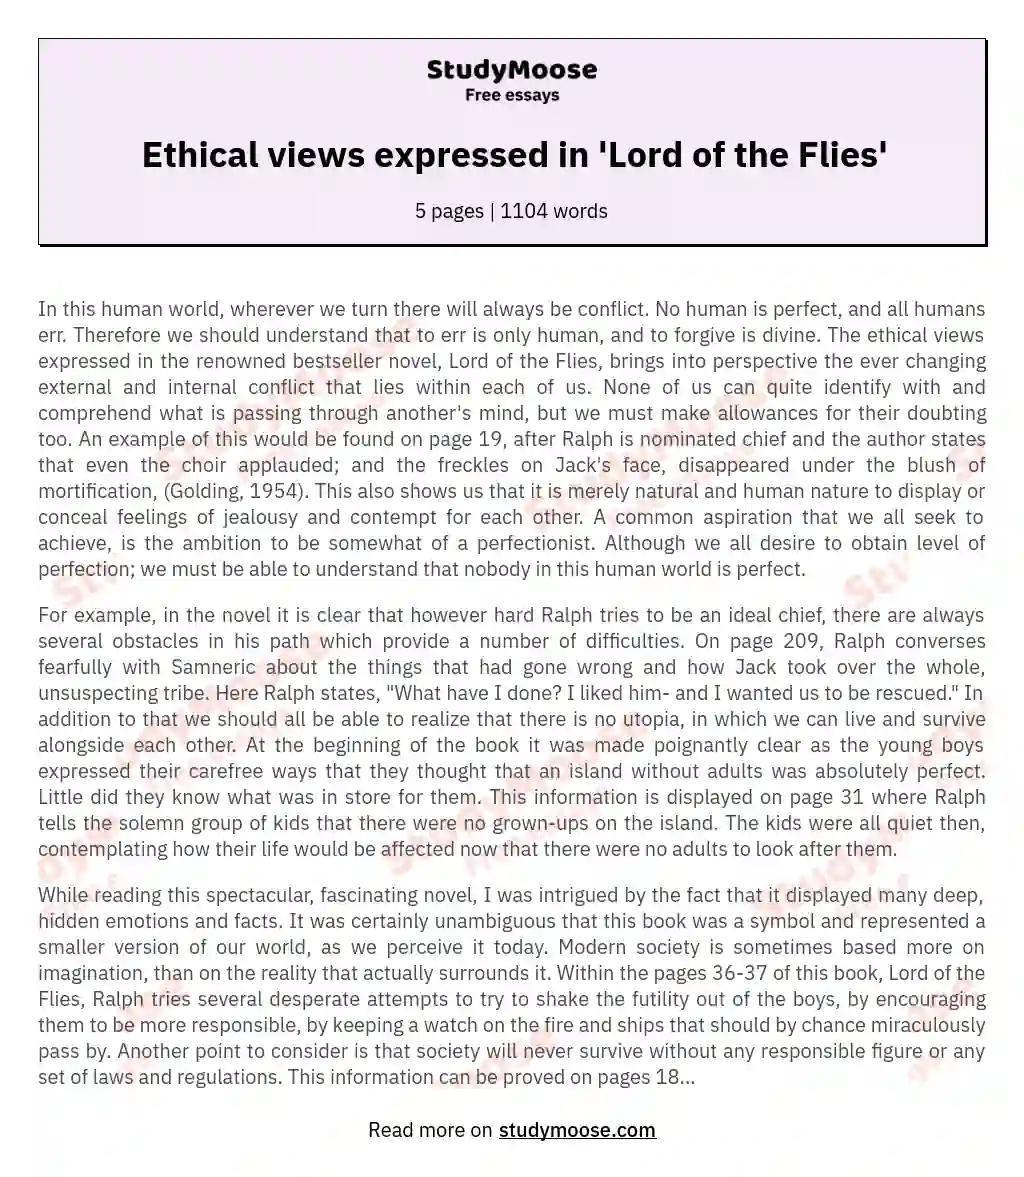 Ethical views expressed in 'Lord of the Flies' essay